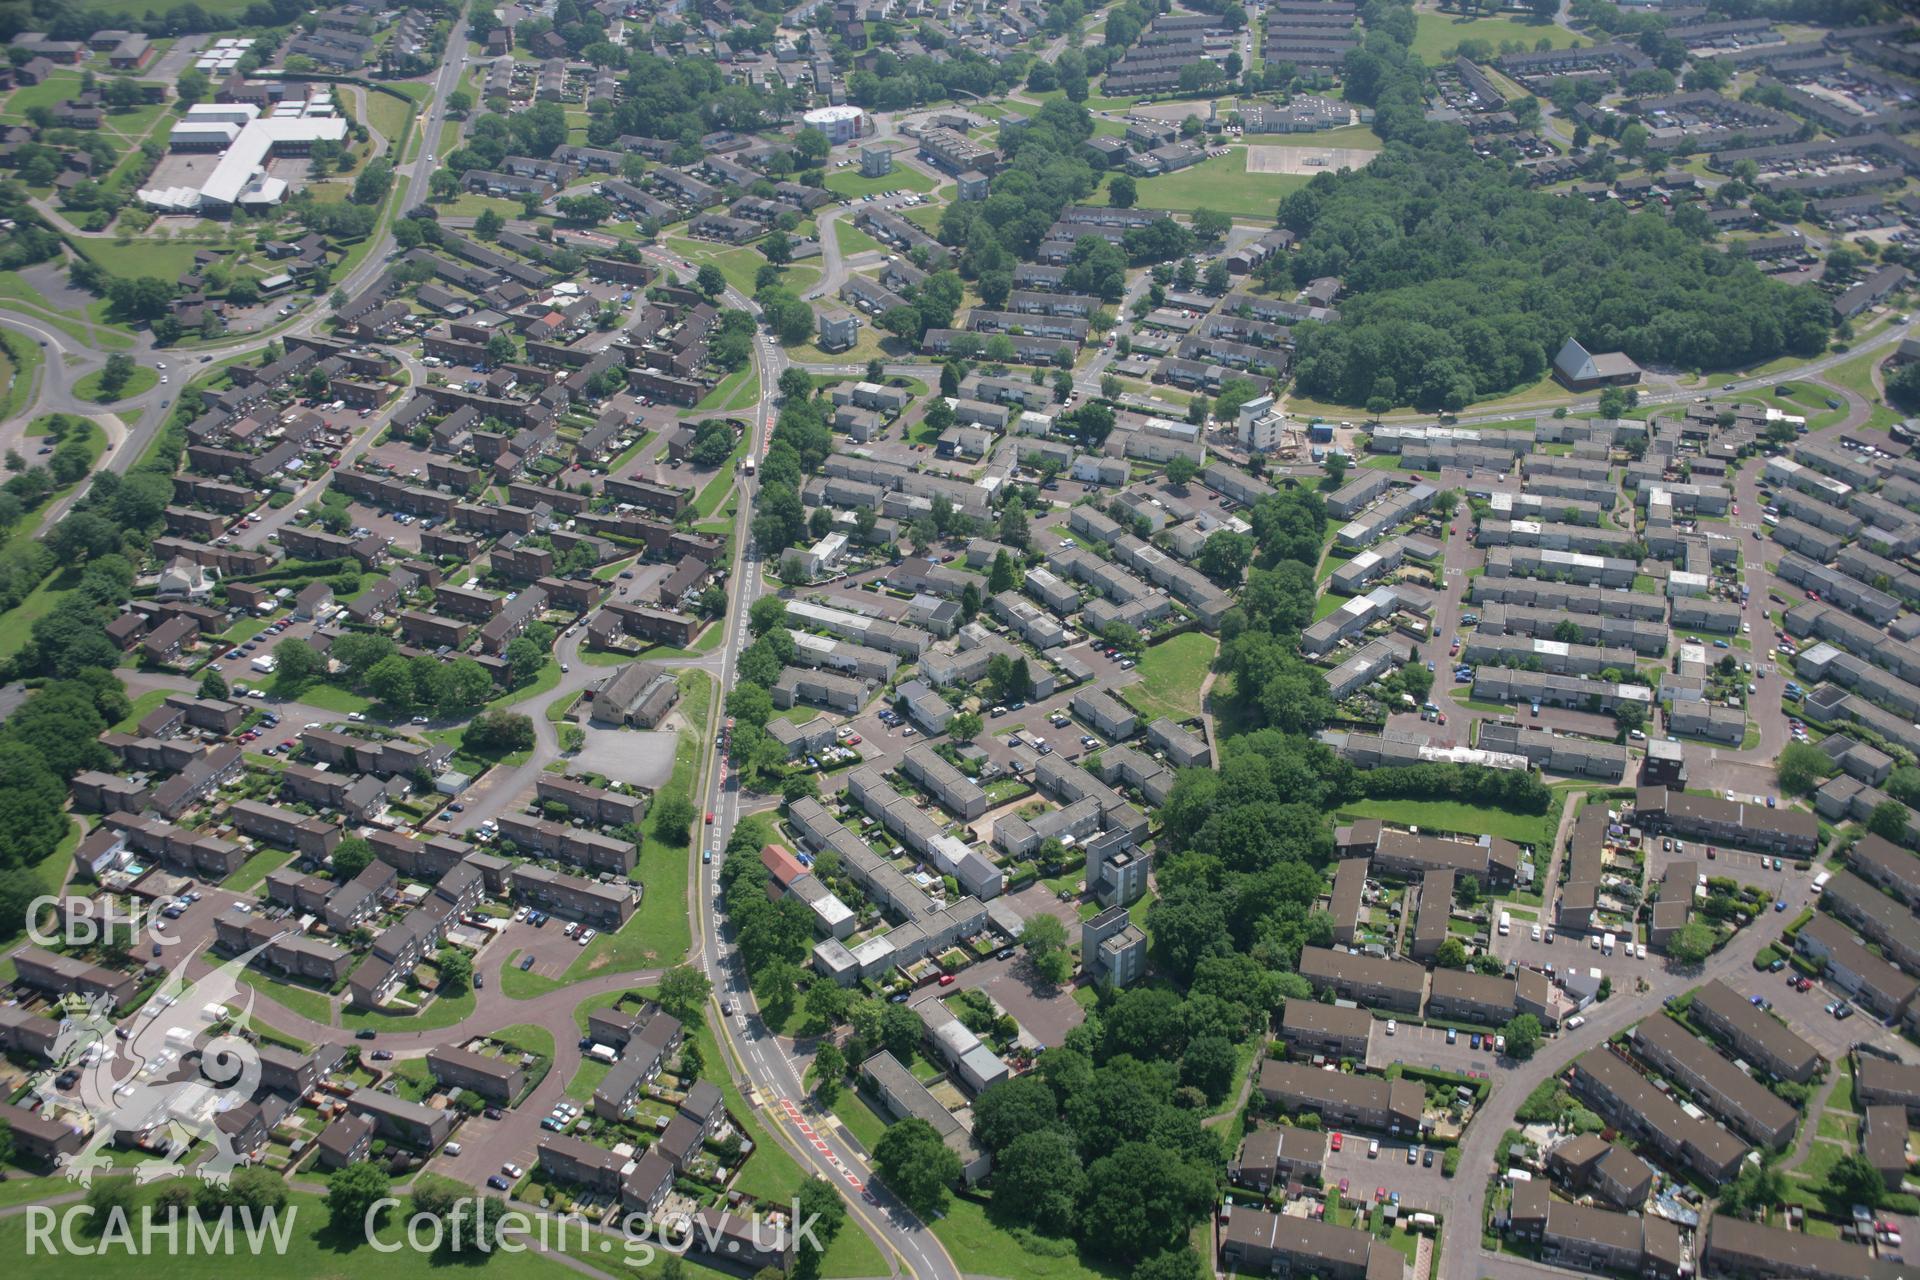 RCAHMW colour oblique aerial photograph of the Green Meadow Housing Estate at Cwmbran from the north-west. Taken on 09 June 2006 by Toby Driver.